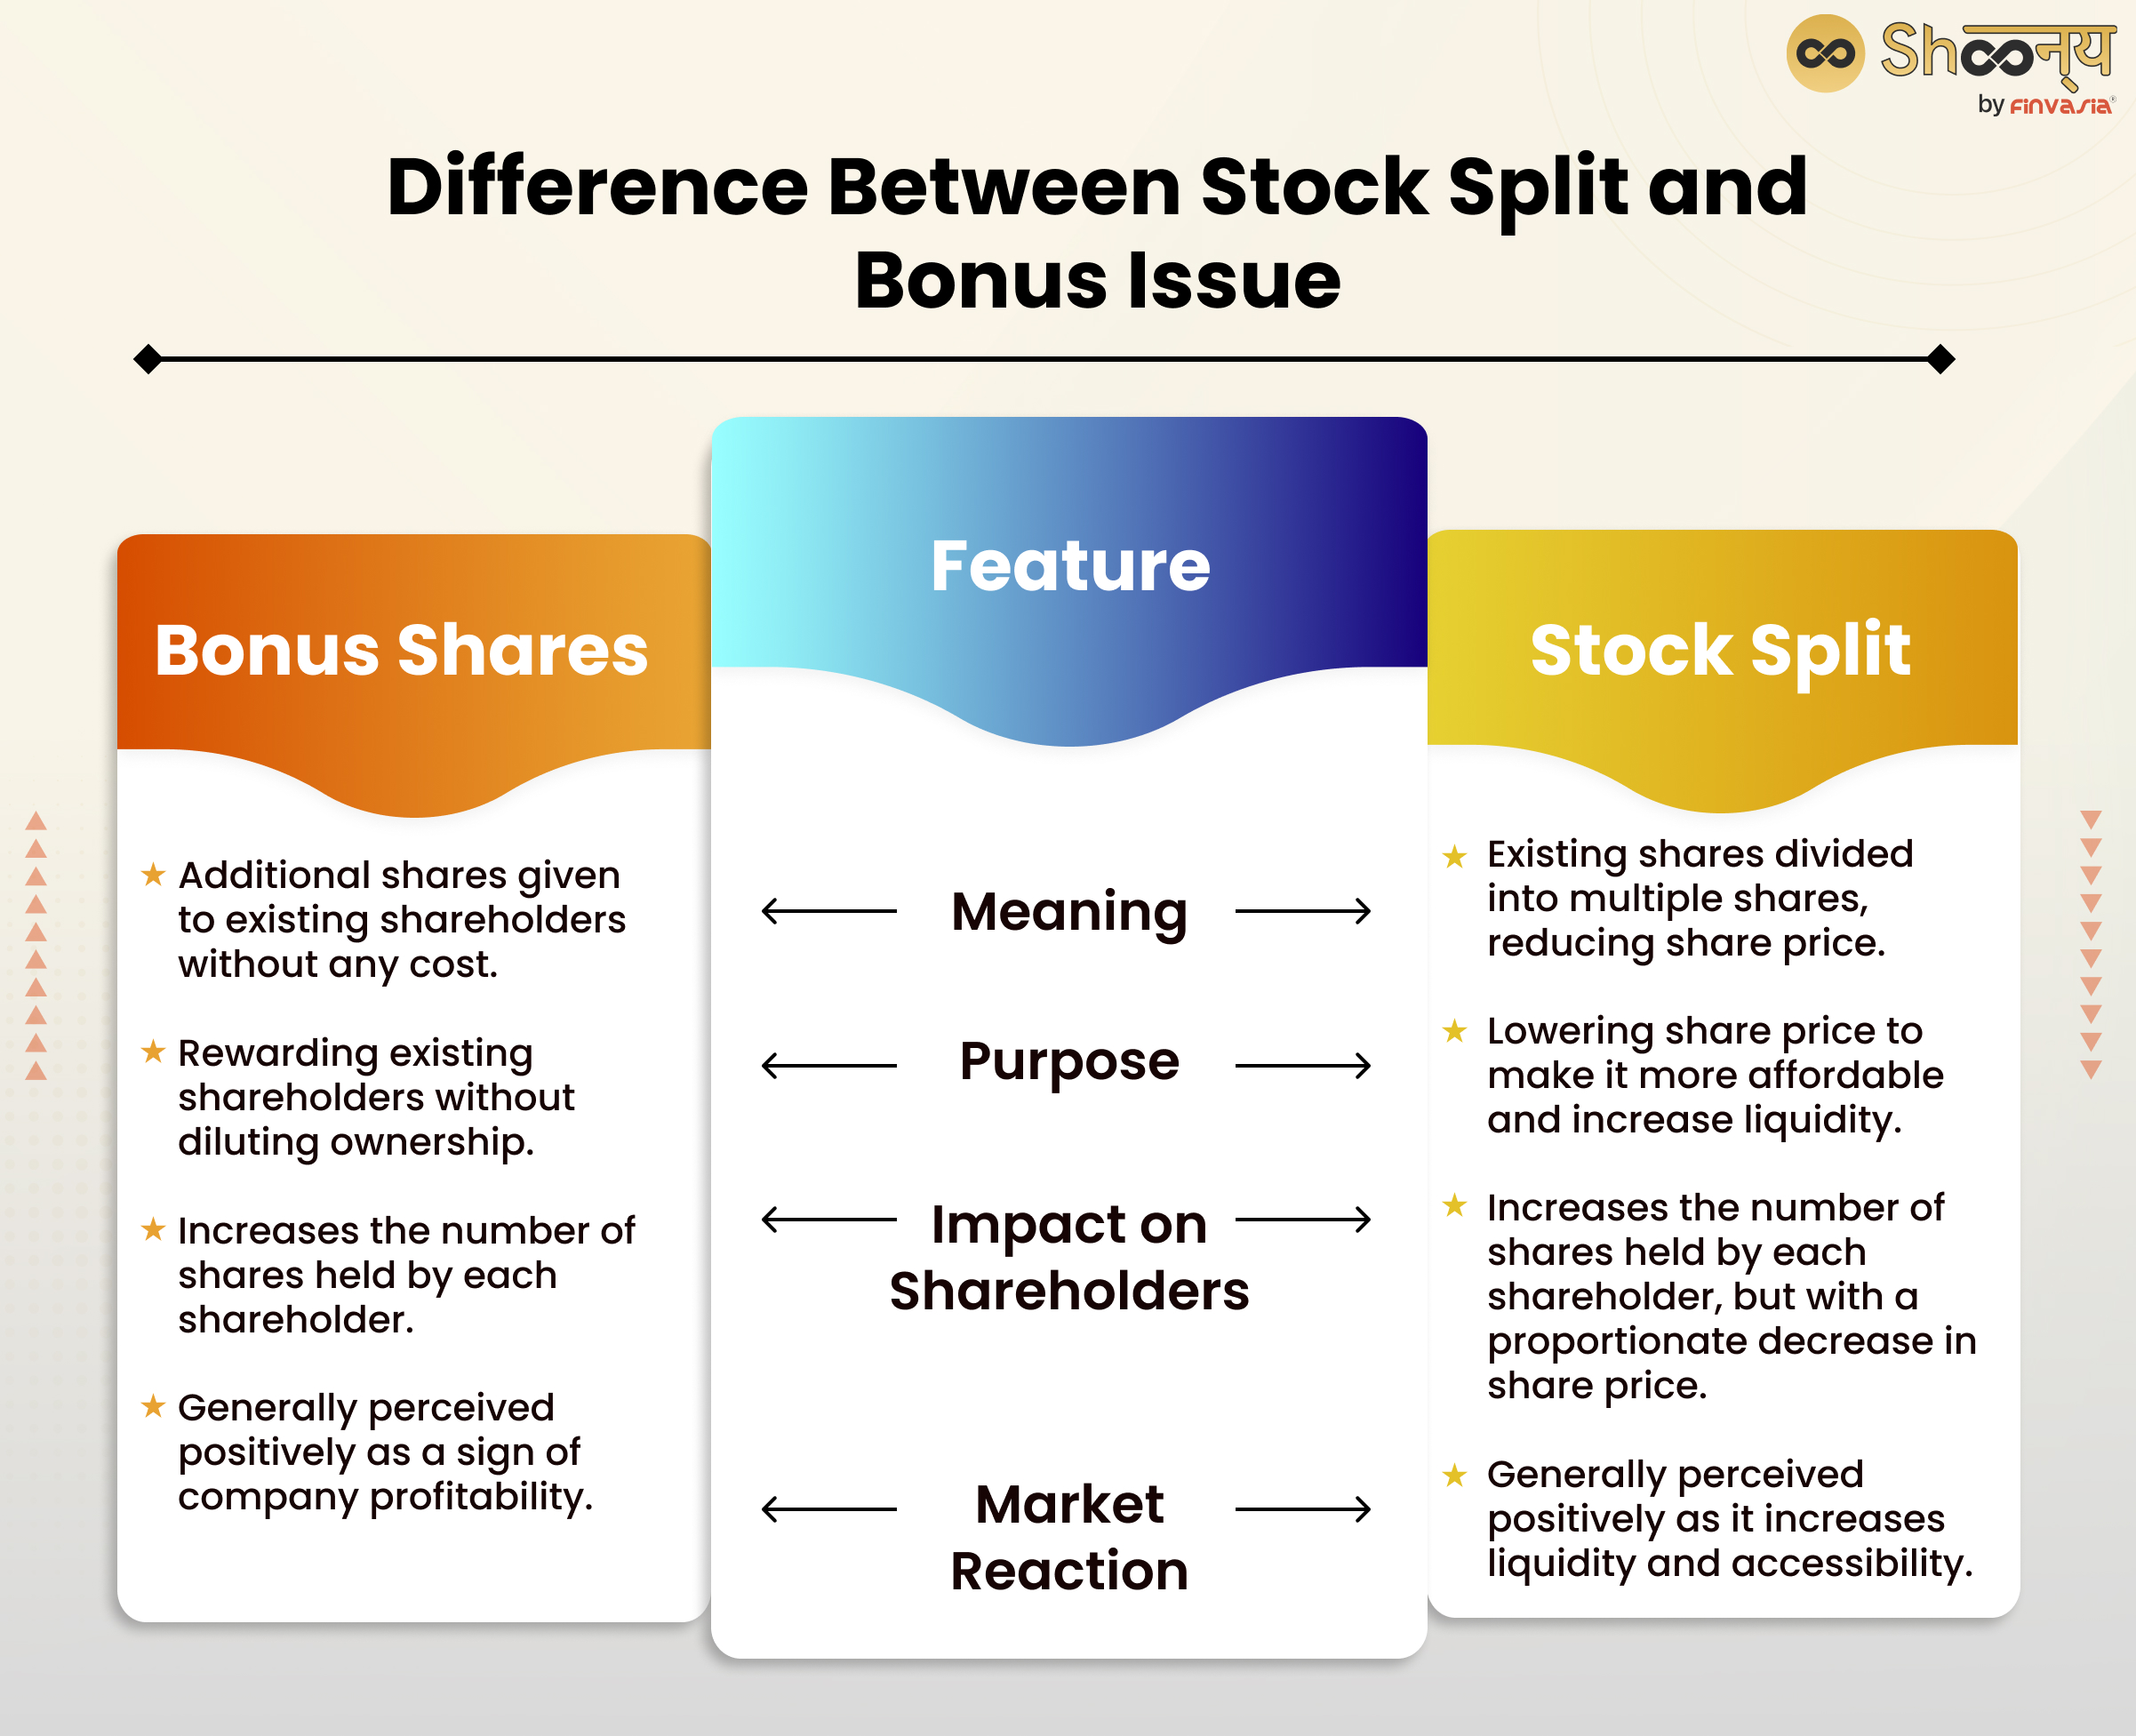 Difference Between Stock Split and Bonus Issue
